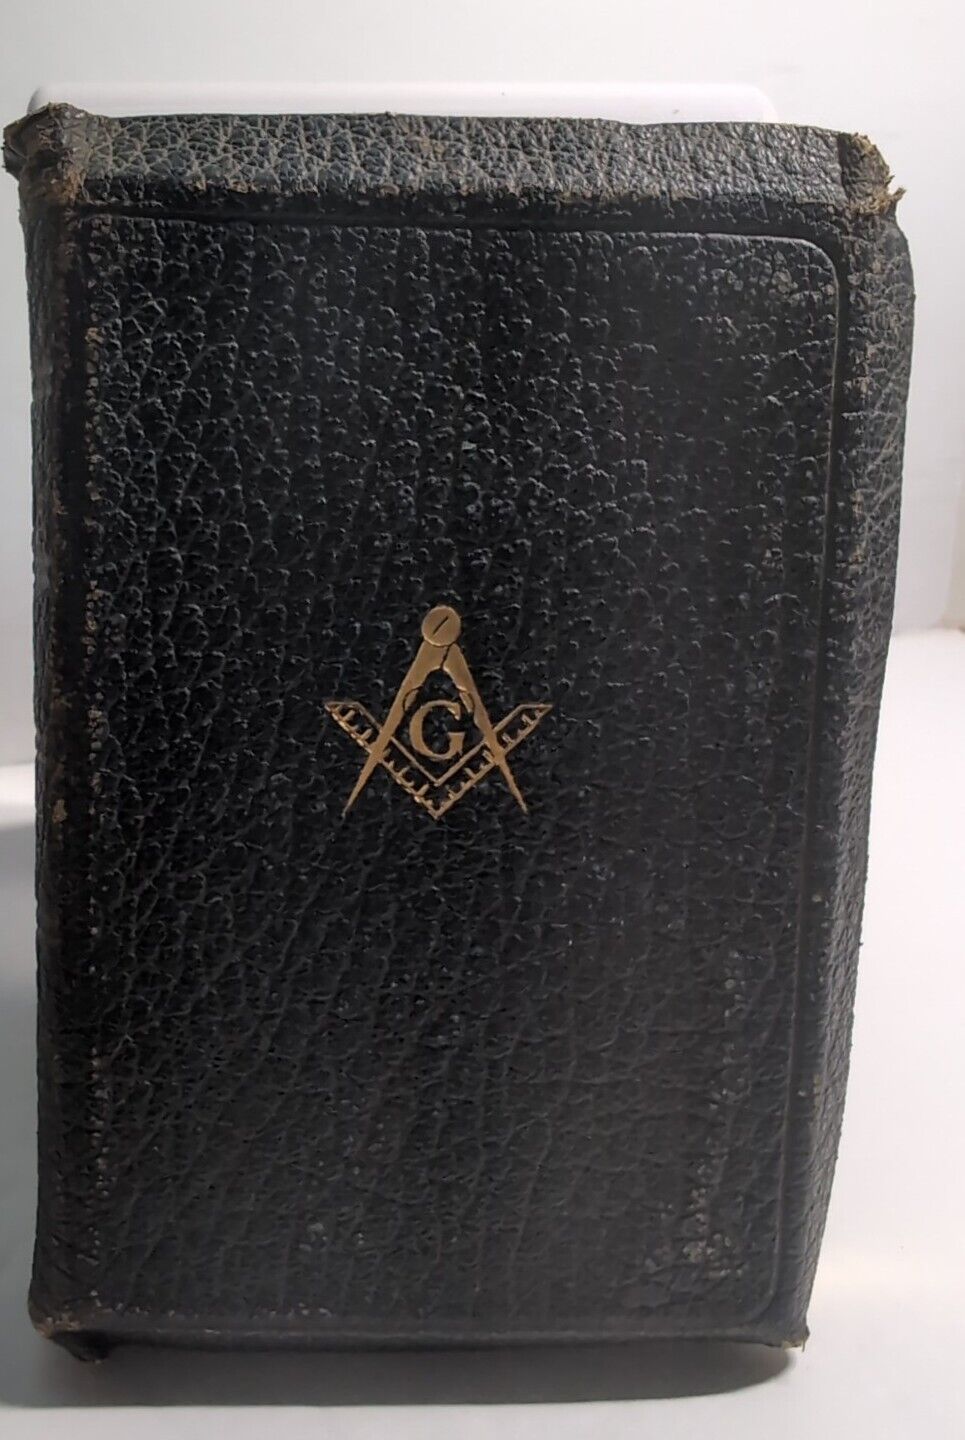 FREE MASON HOLY BIBLE MASONIC EDITION Oxford printed In London Dated 1927 